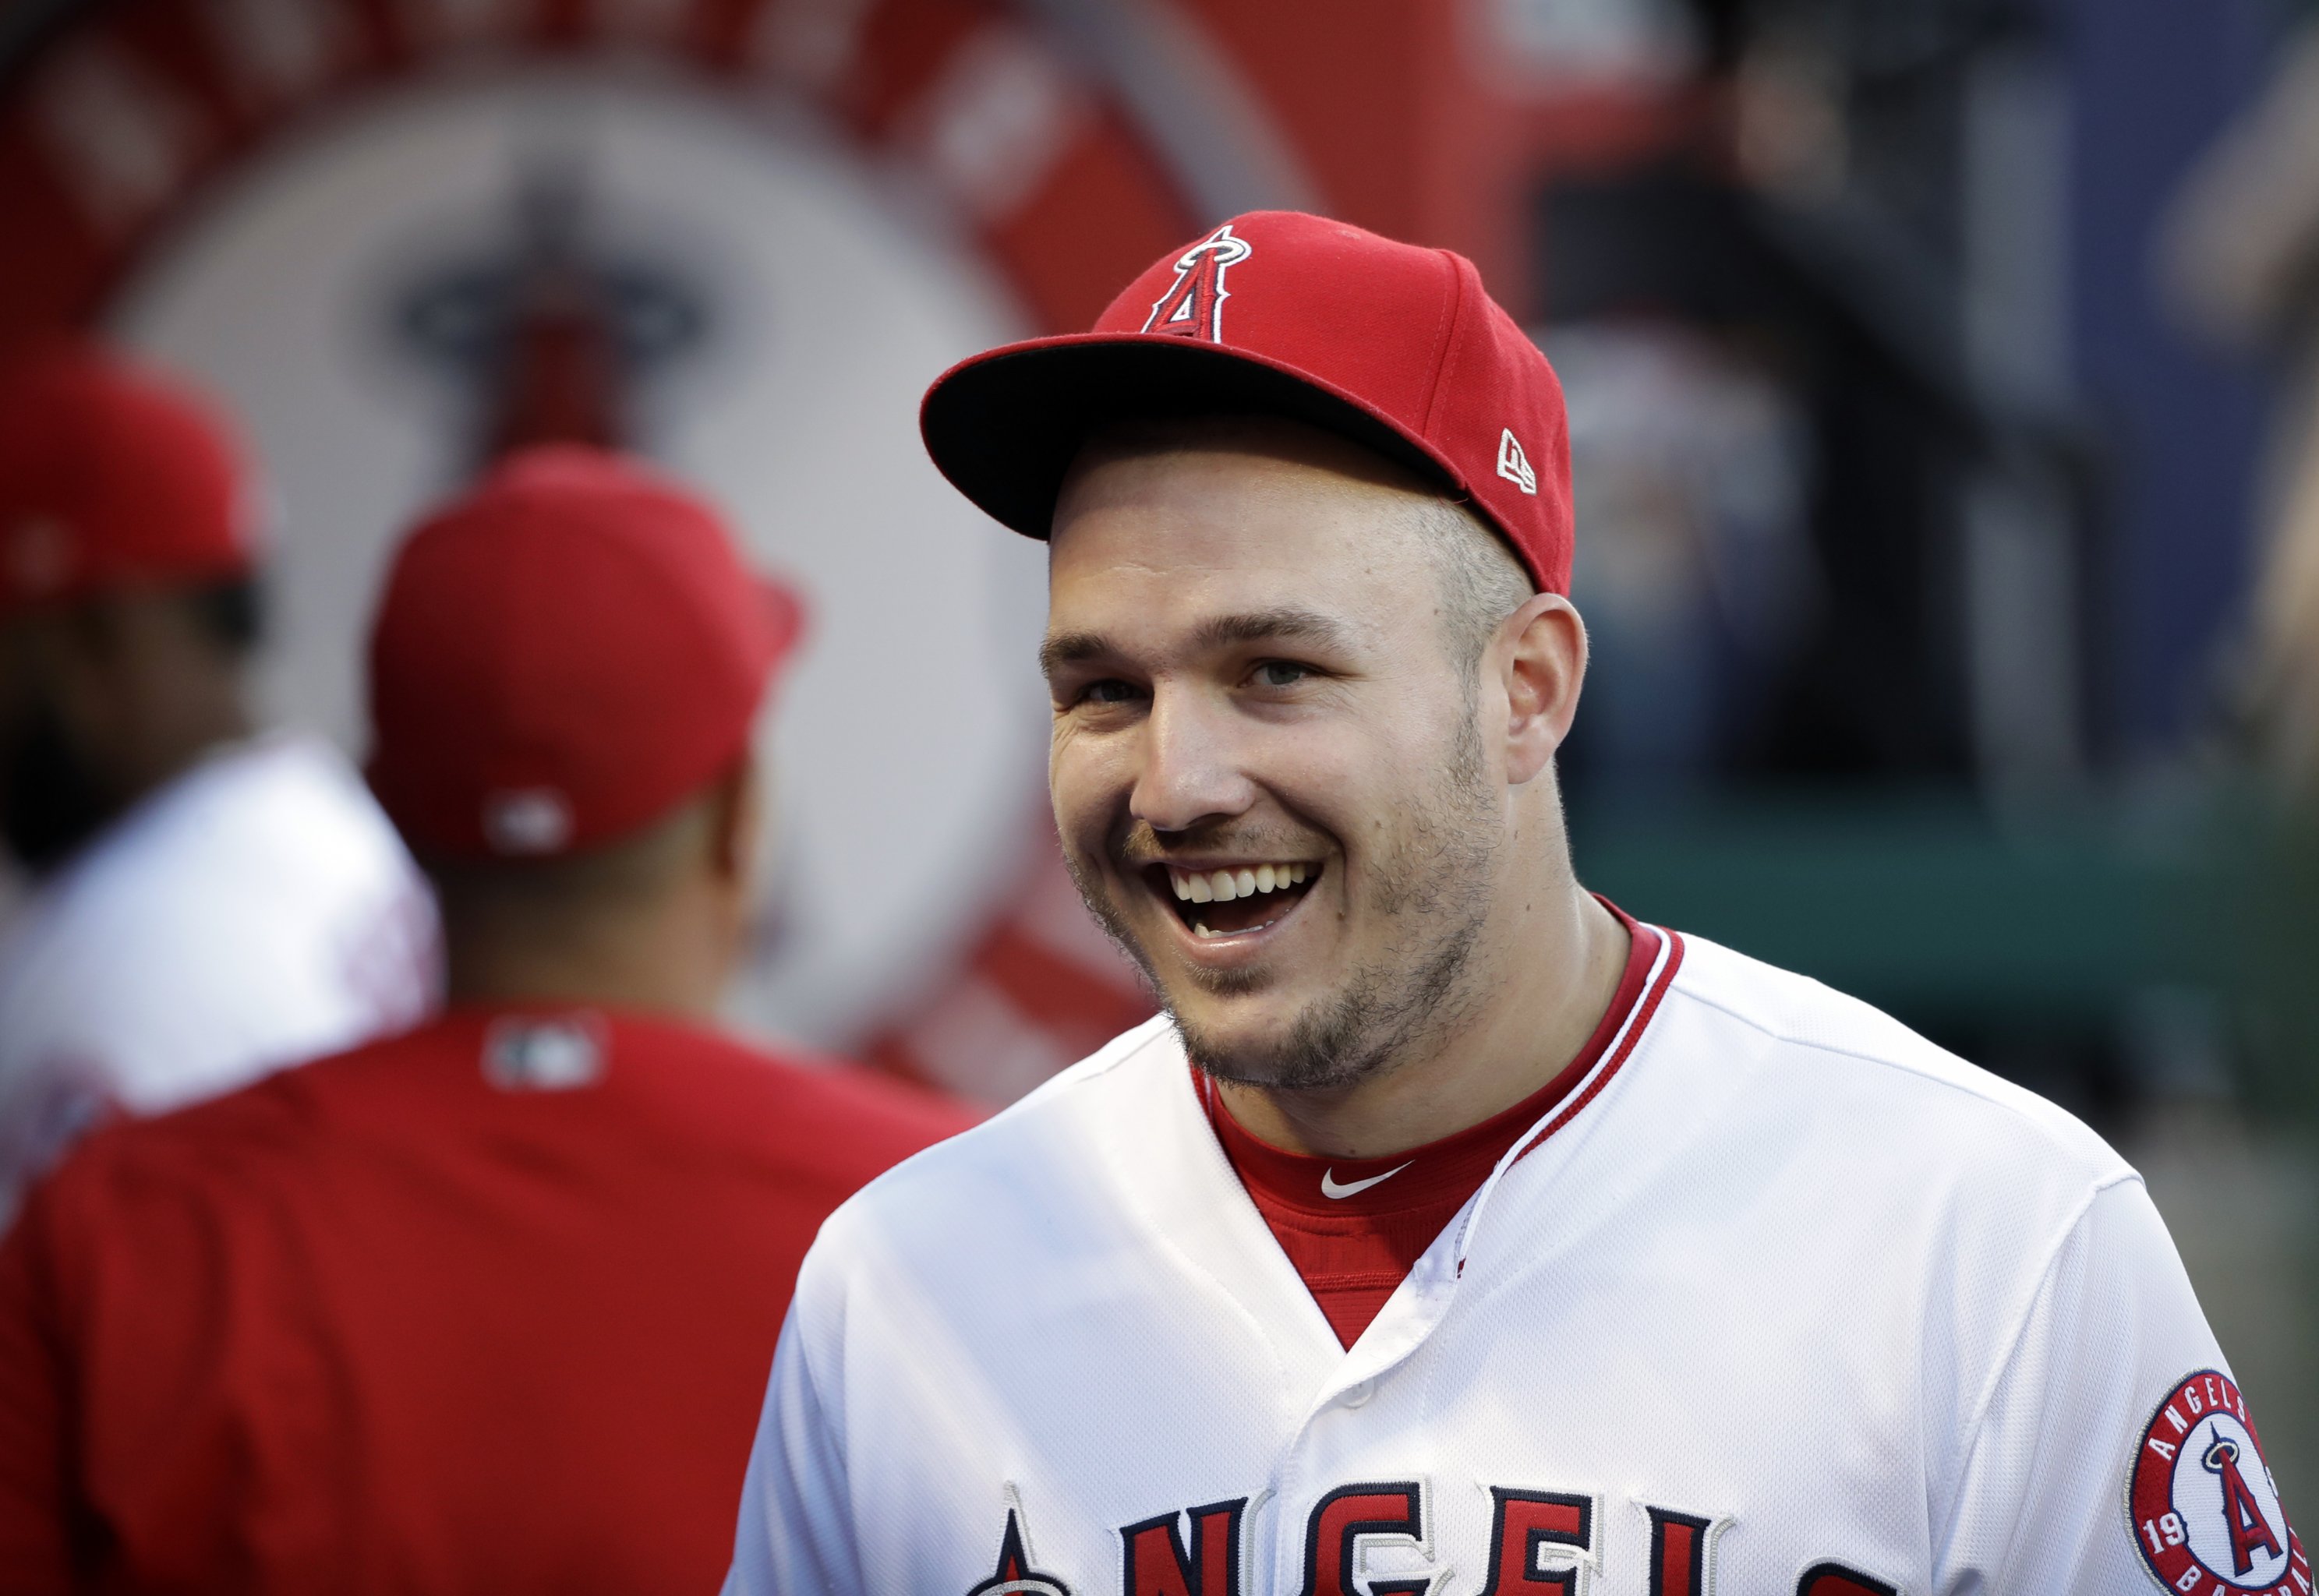 Mike Trout and Matt Kemp rank 5th and 11th in MLB jersey sales